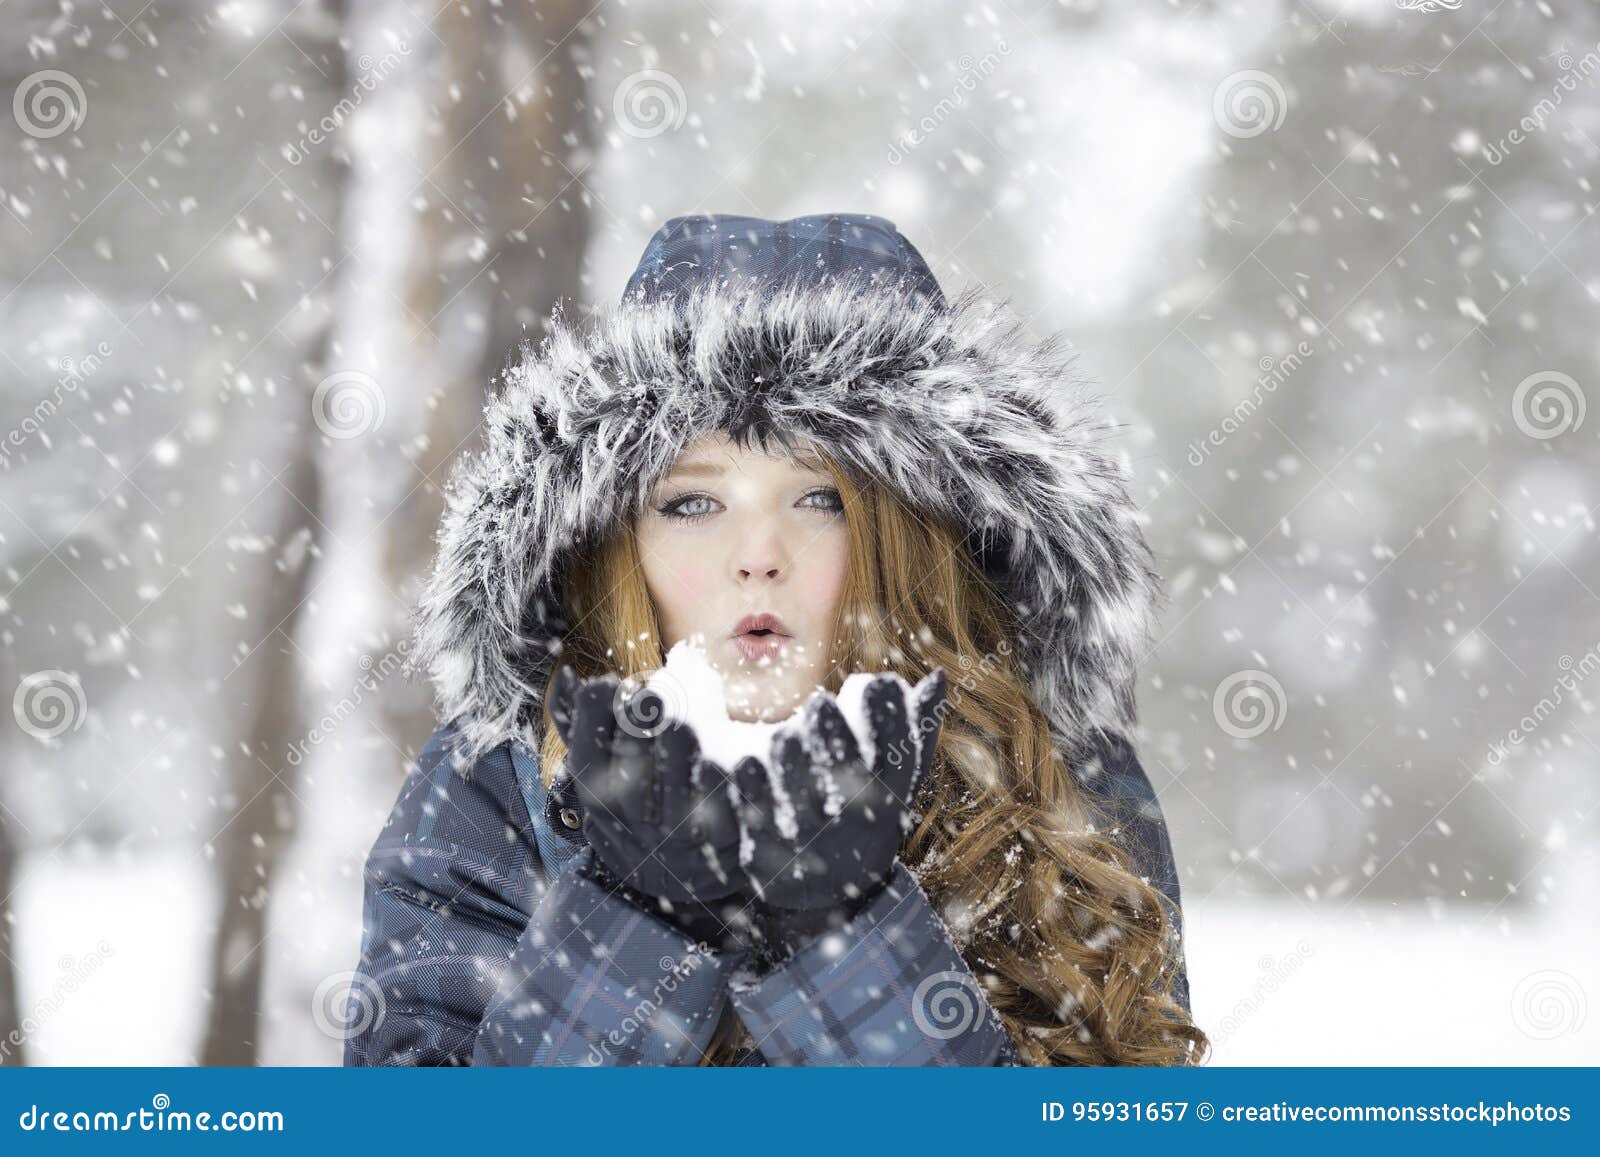 Woman Wearing Fur Hood In A Snow Storm Picture. Image: 95931657